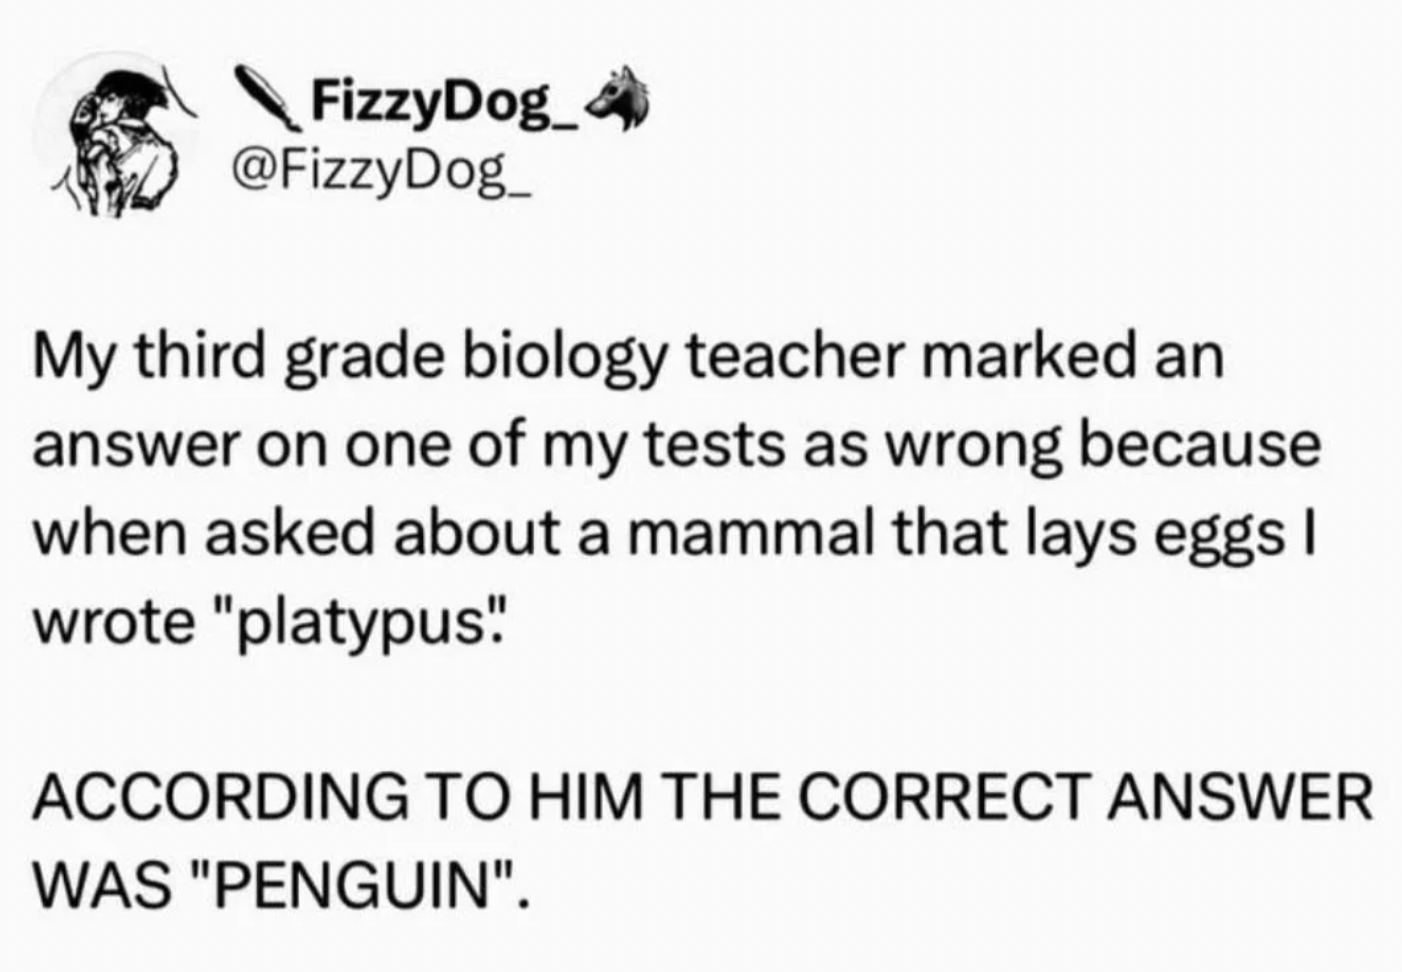 paper - FizzyDog_ My third grade biology teacher marked an answer on one of my tests as wrong because when asked about a mammal that lays eggs I wrote "platypus! According To Him The Correct Answer Was "Penguin".